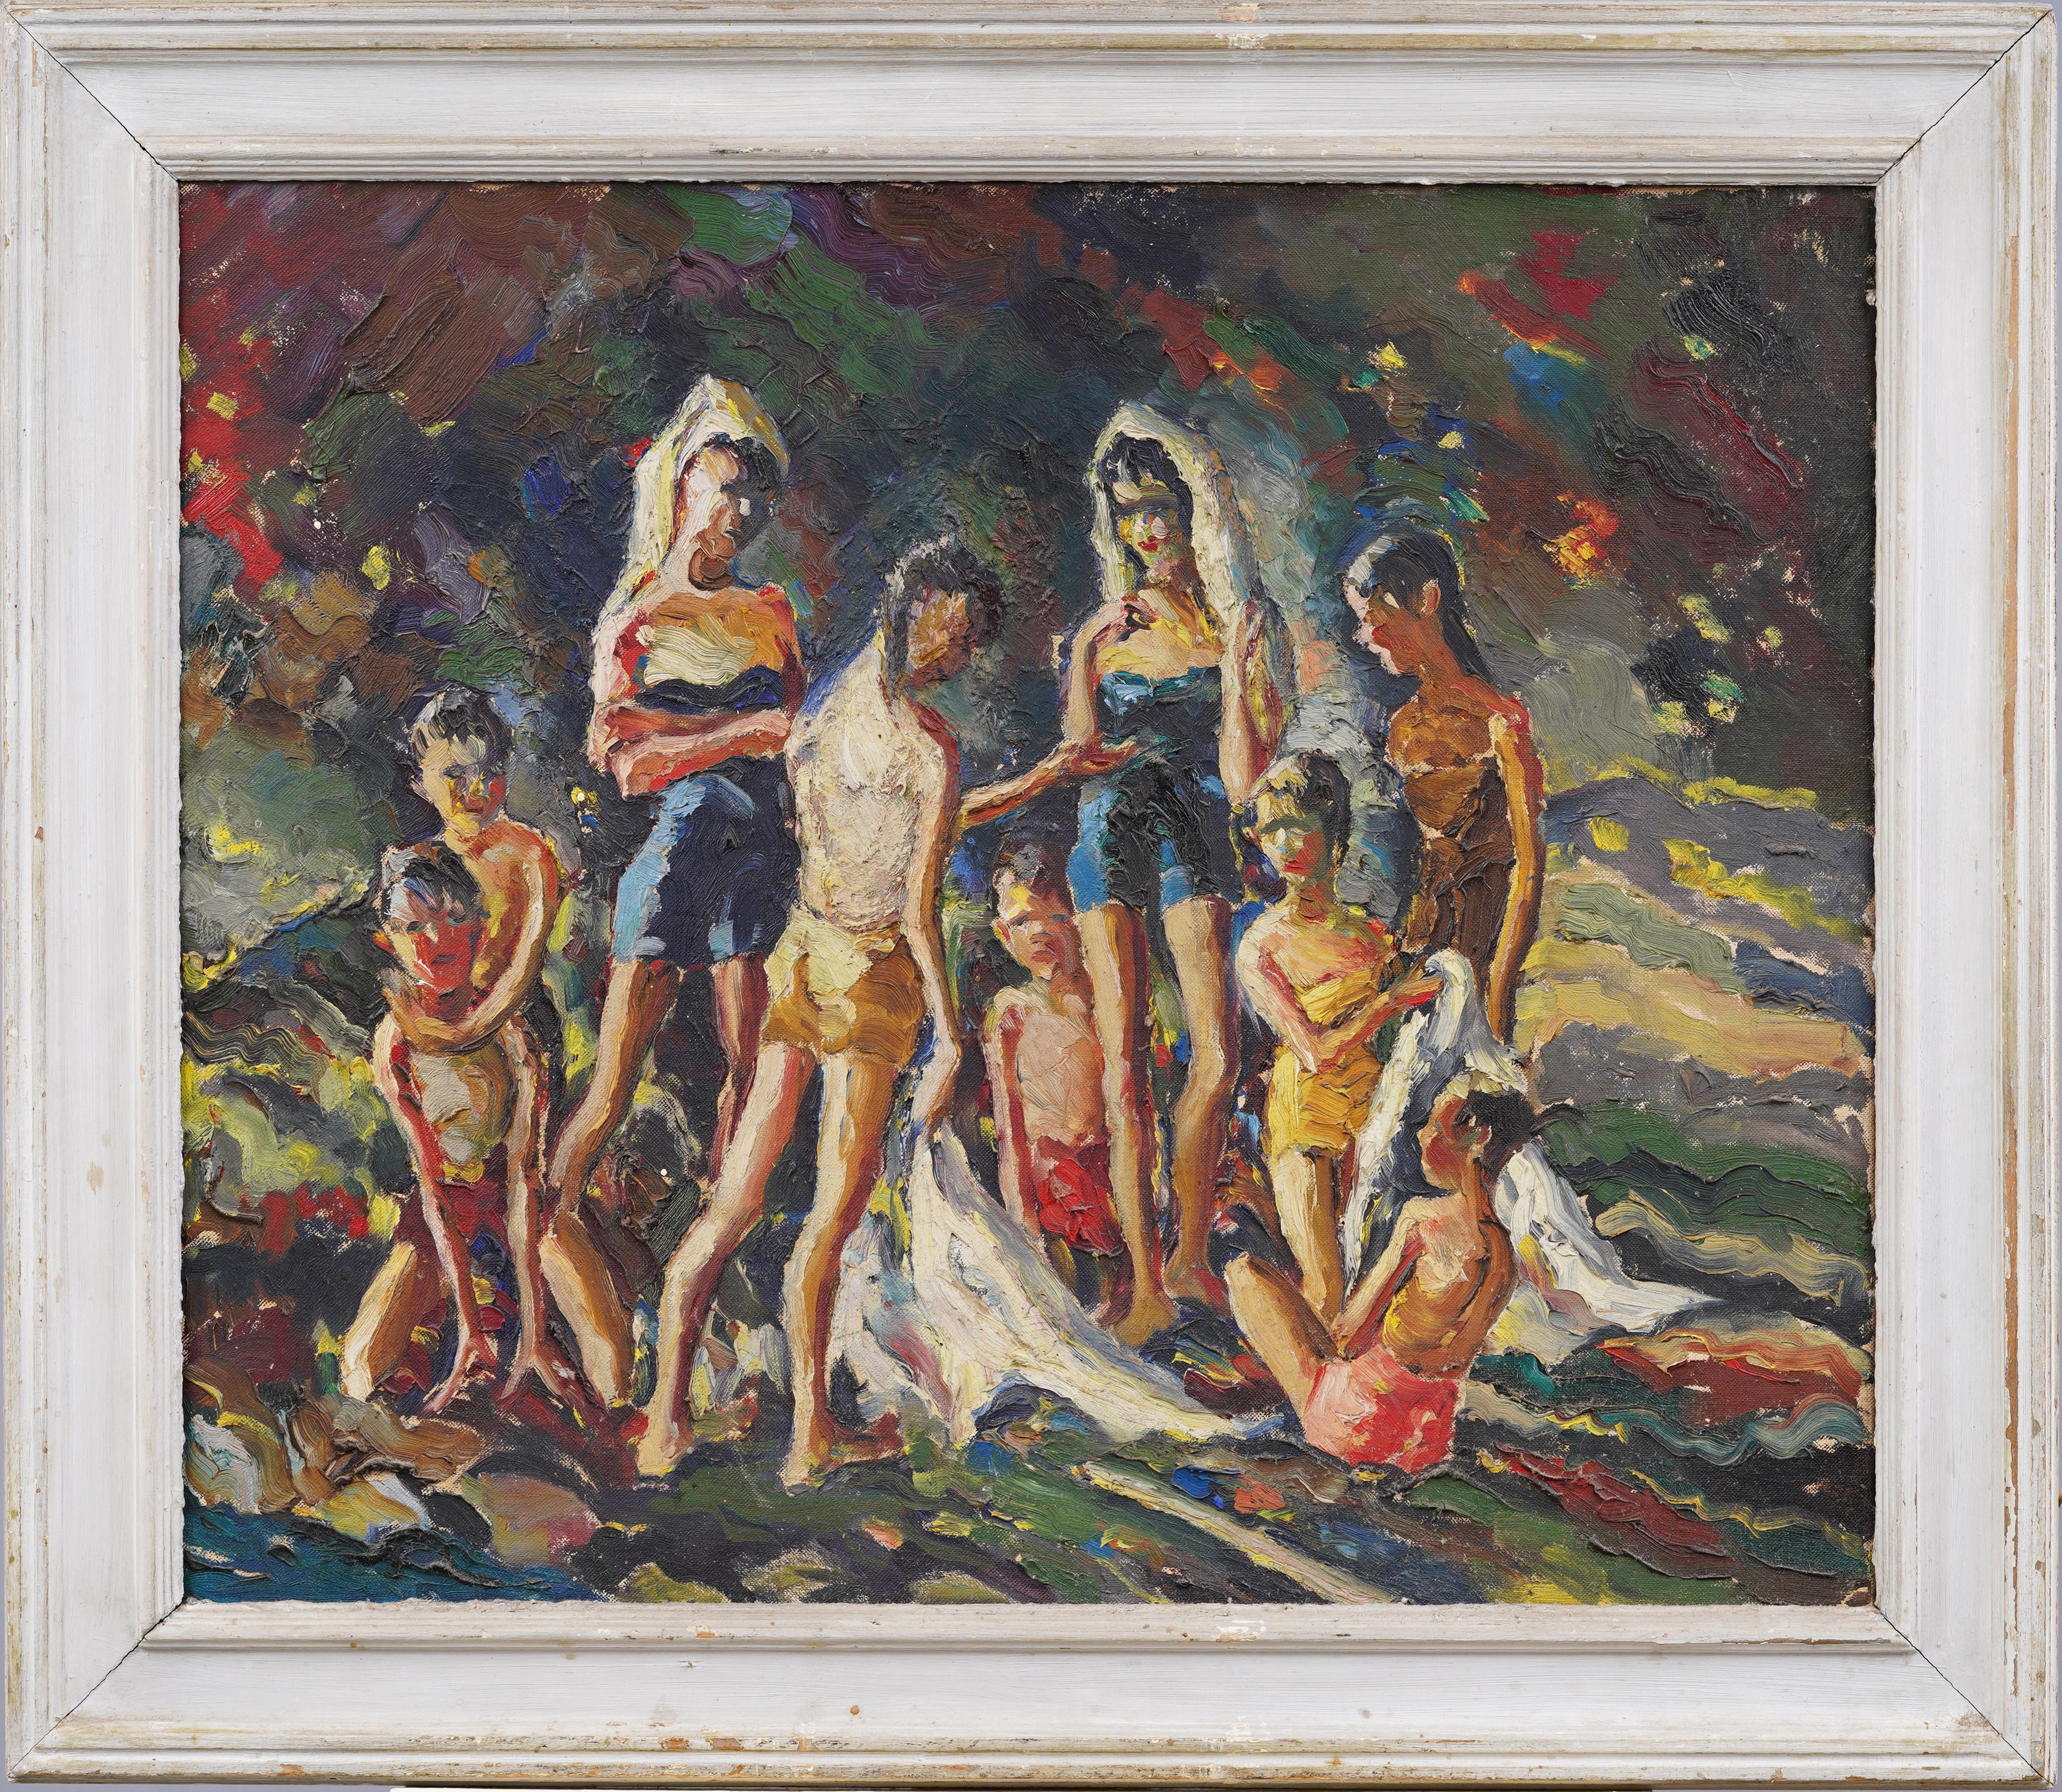 Nicely painted mid century impressionist bather scene by John Edward Costigan (1888 - 1972).  Oil on board.  Framed.  Signed verso.